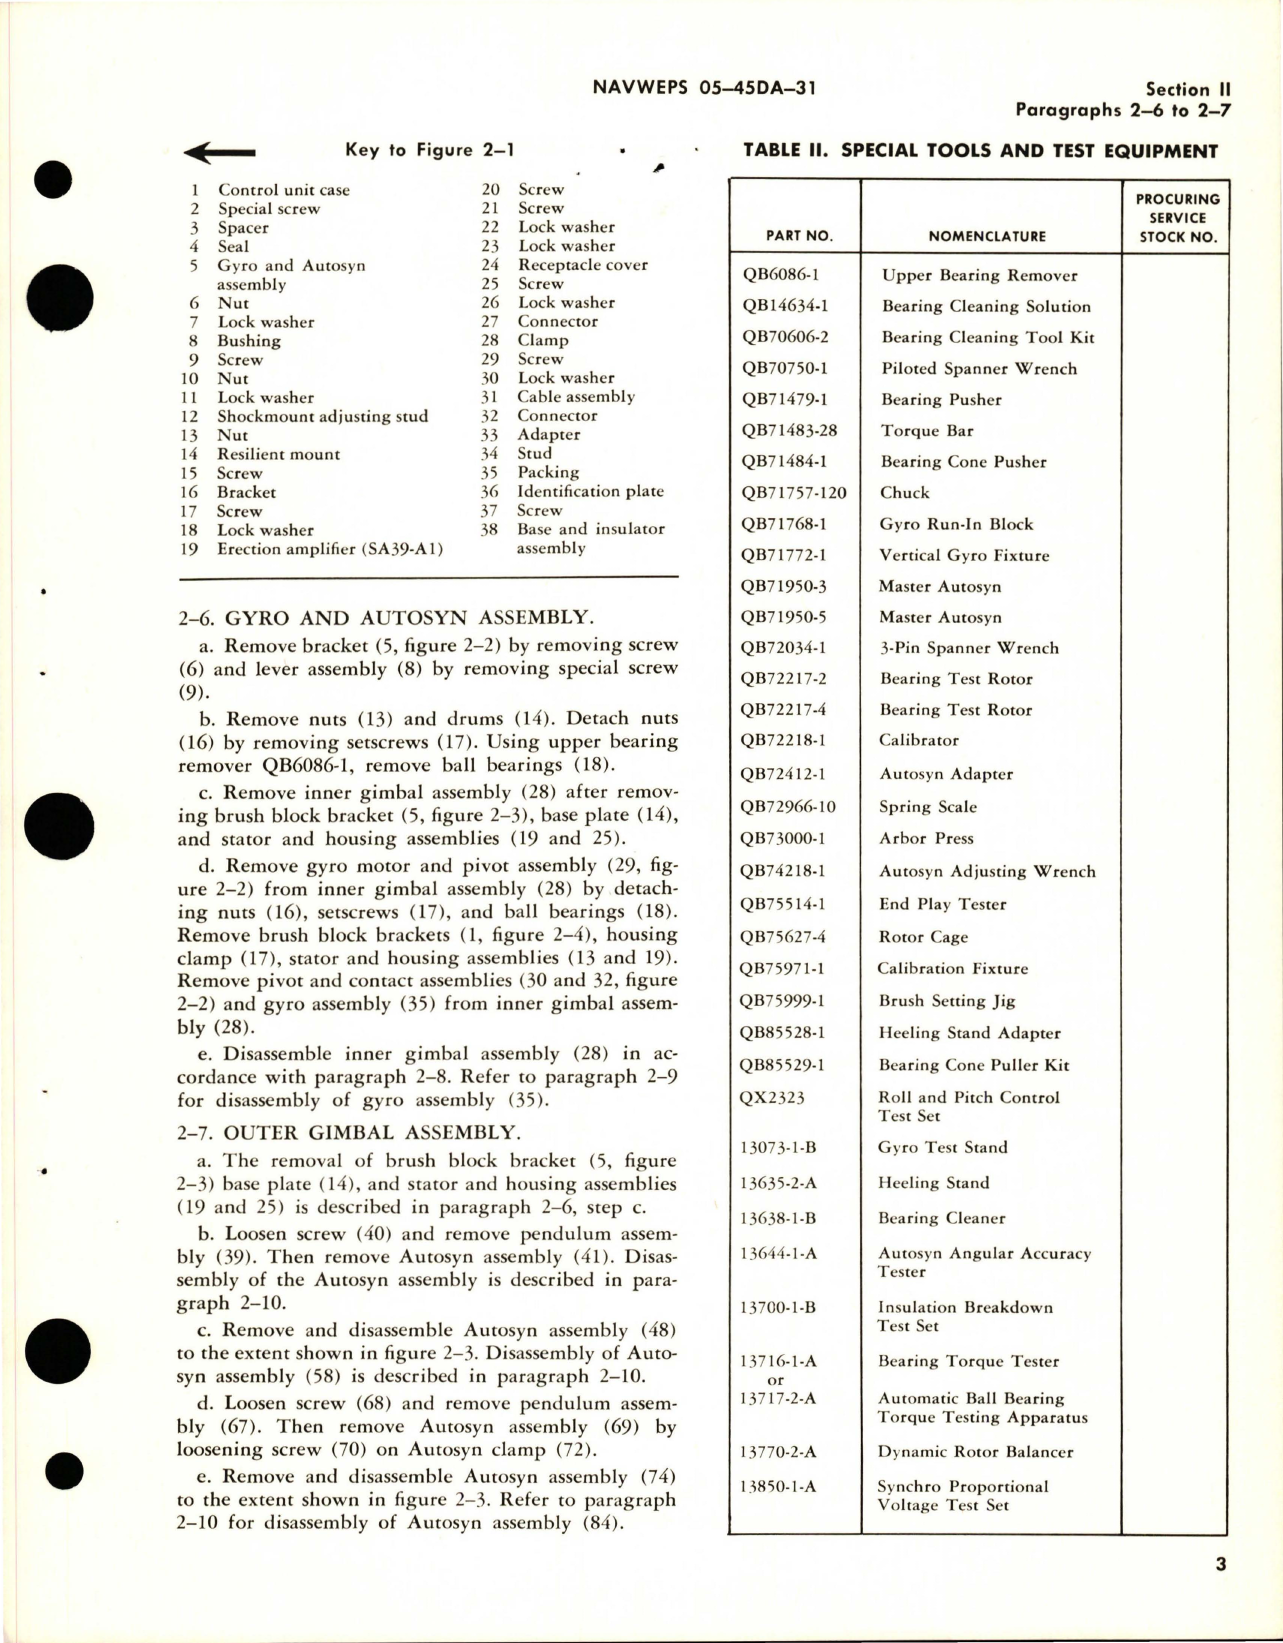 Sample page 9 from AirCorps Library document: Overhaul Instructions for Automatic Pilot Roll and Pitch Control - Part 15836-1-A 